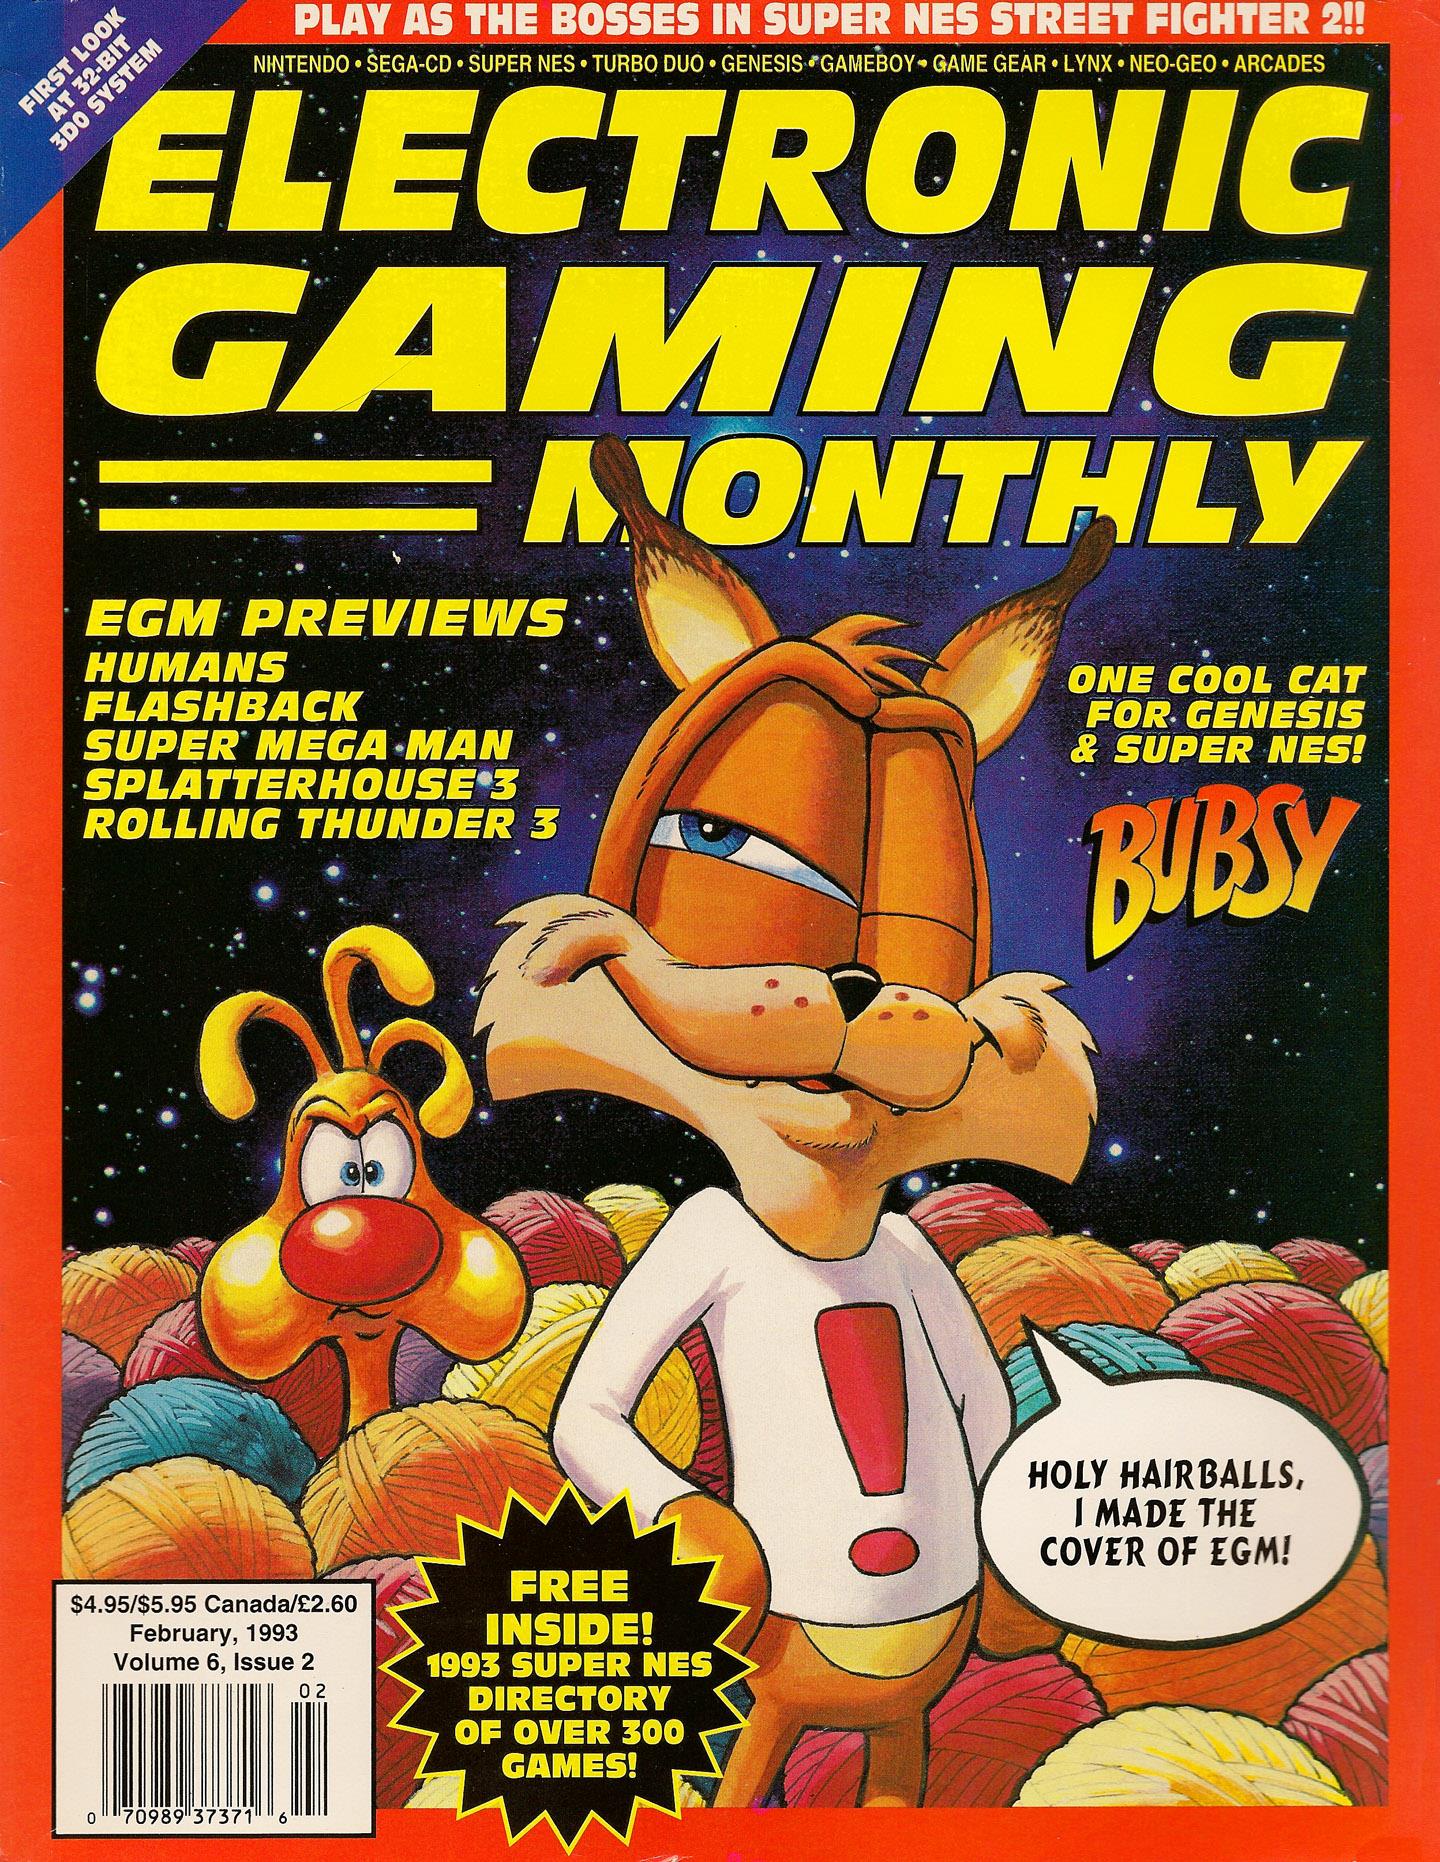 One of my favorite EGM issues of all time